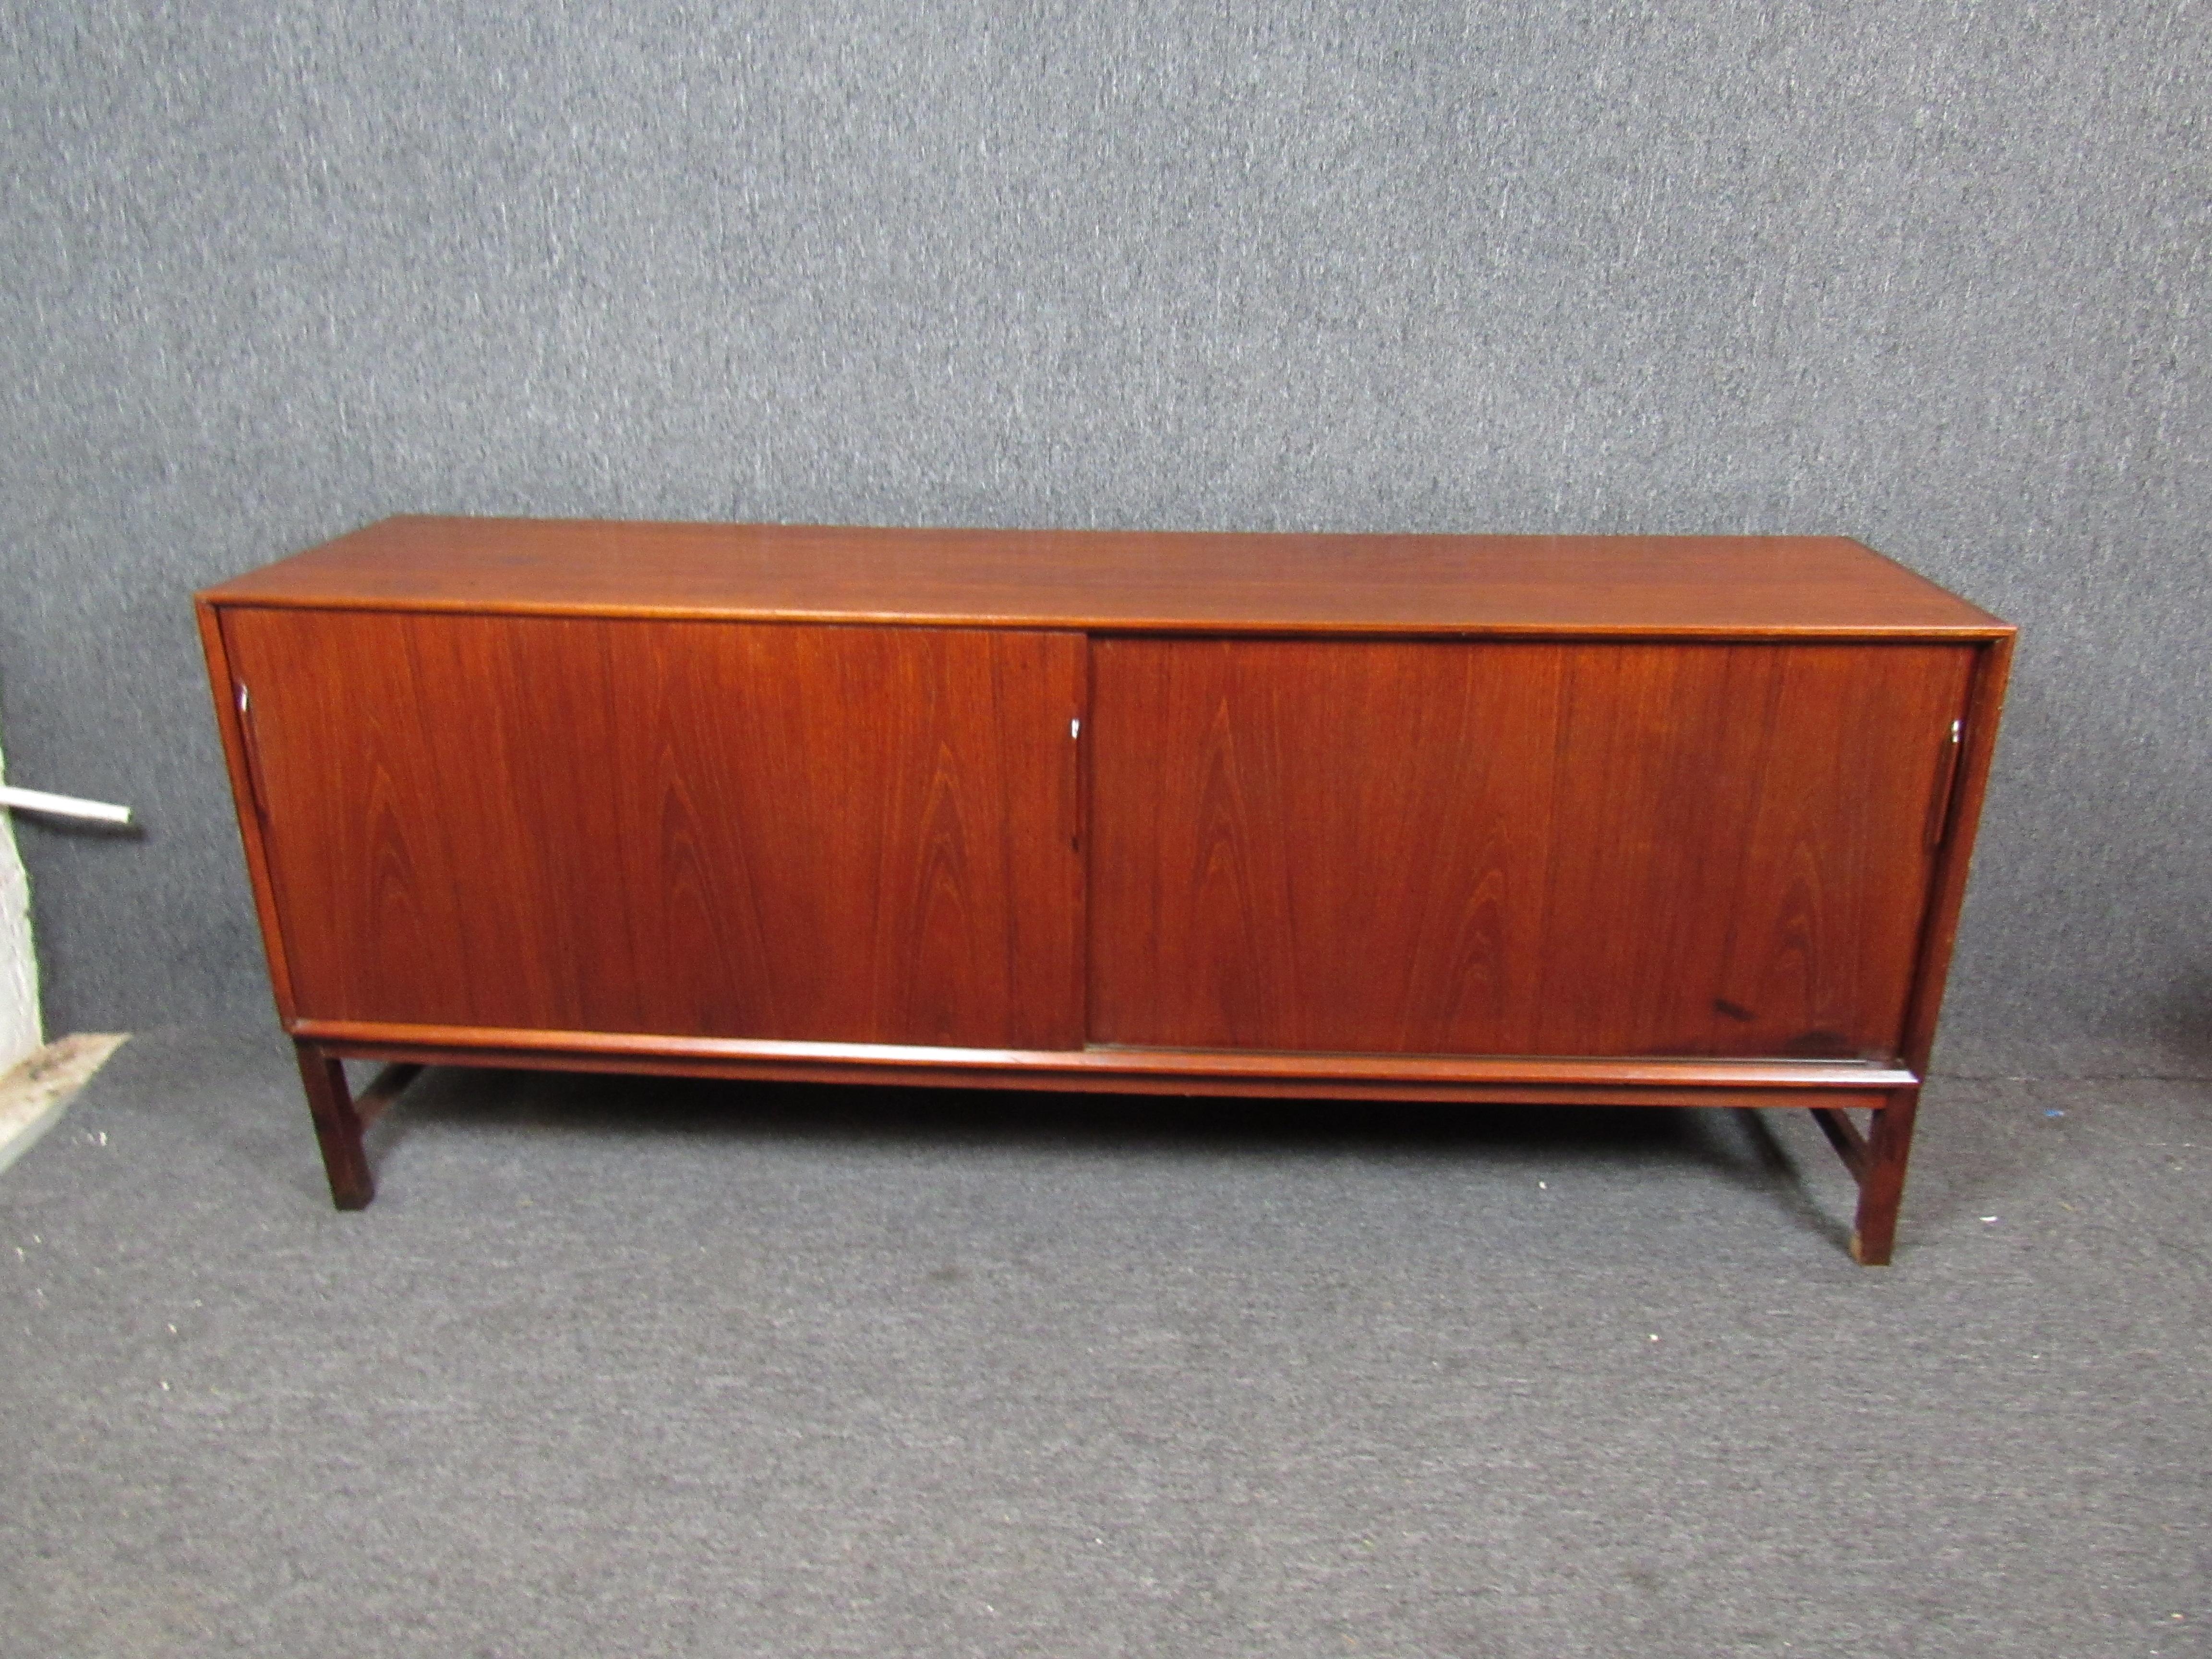 This Mid-Century Modern style credenza offers plenty of storage behind sliding doors, with multiple shelves and slide out trays. A rich woodgrain complements the credenza's minimal design and makes it a standout piece for any setting. Please confirm